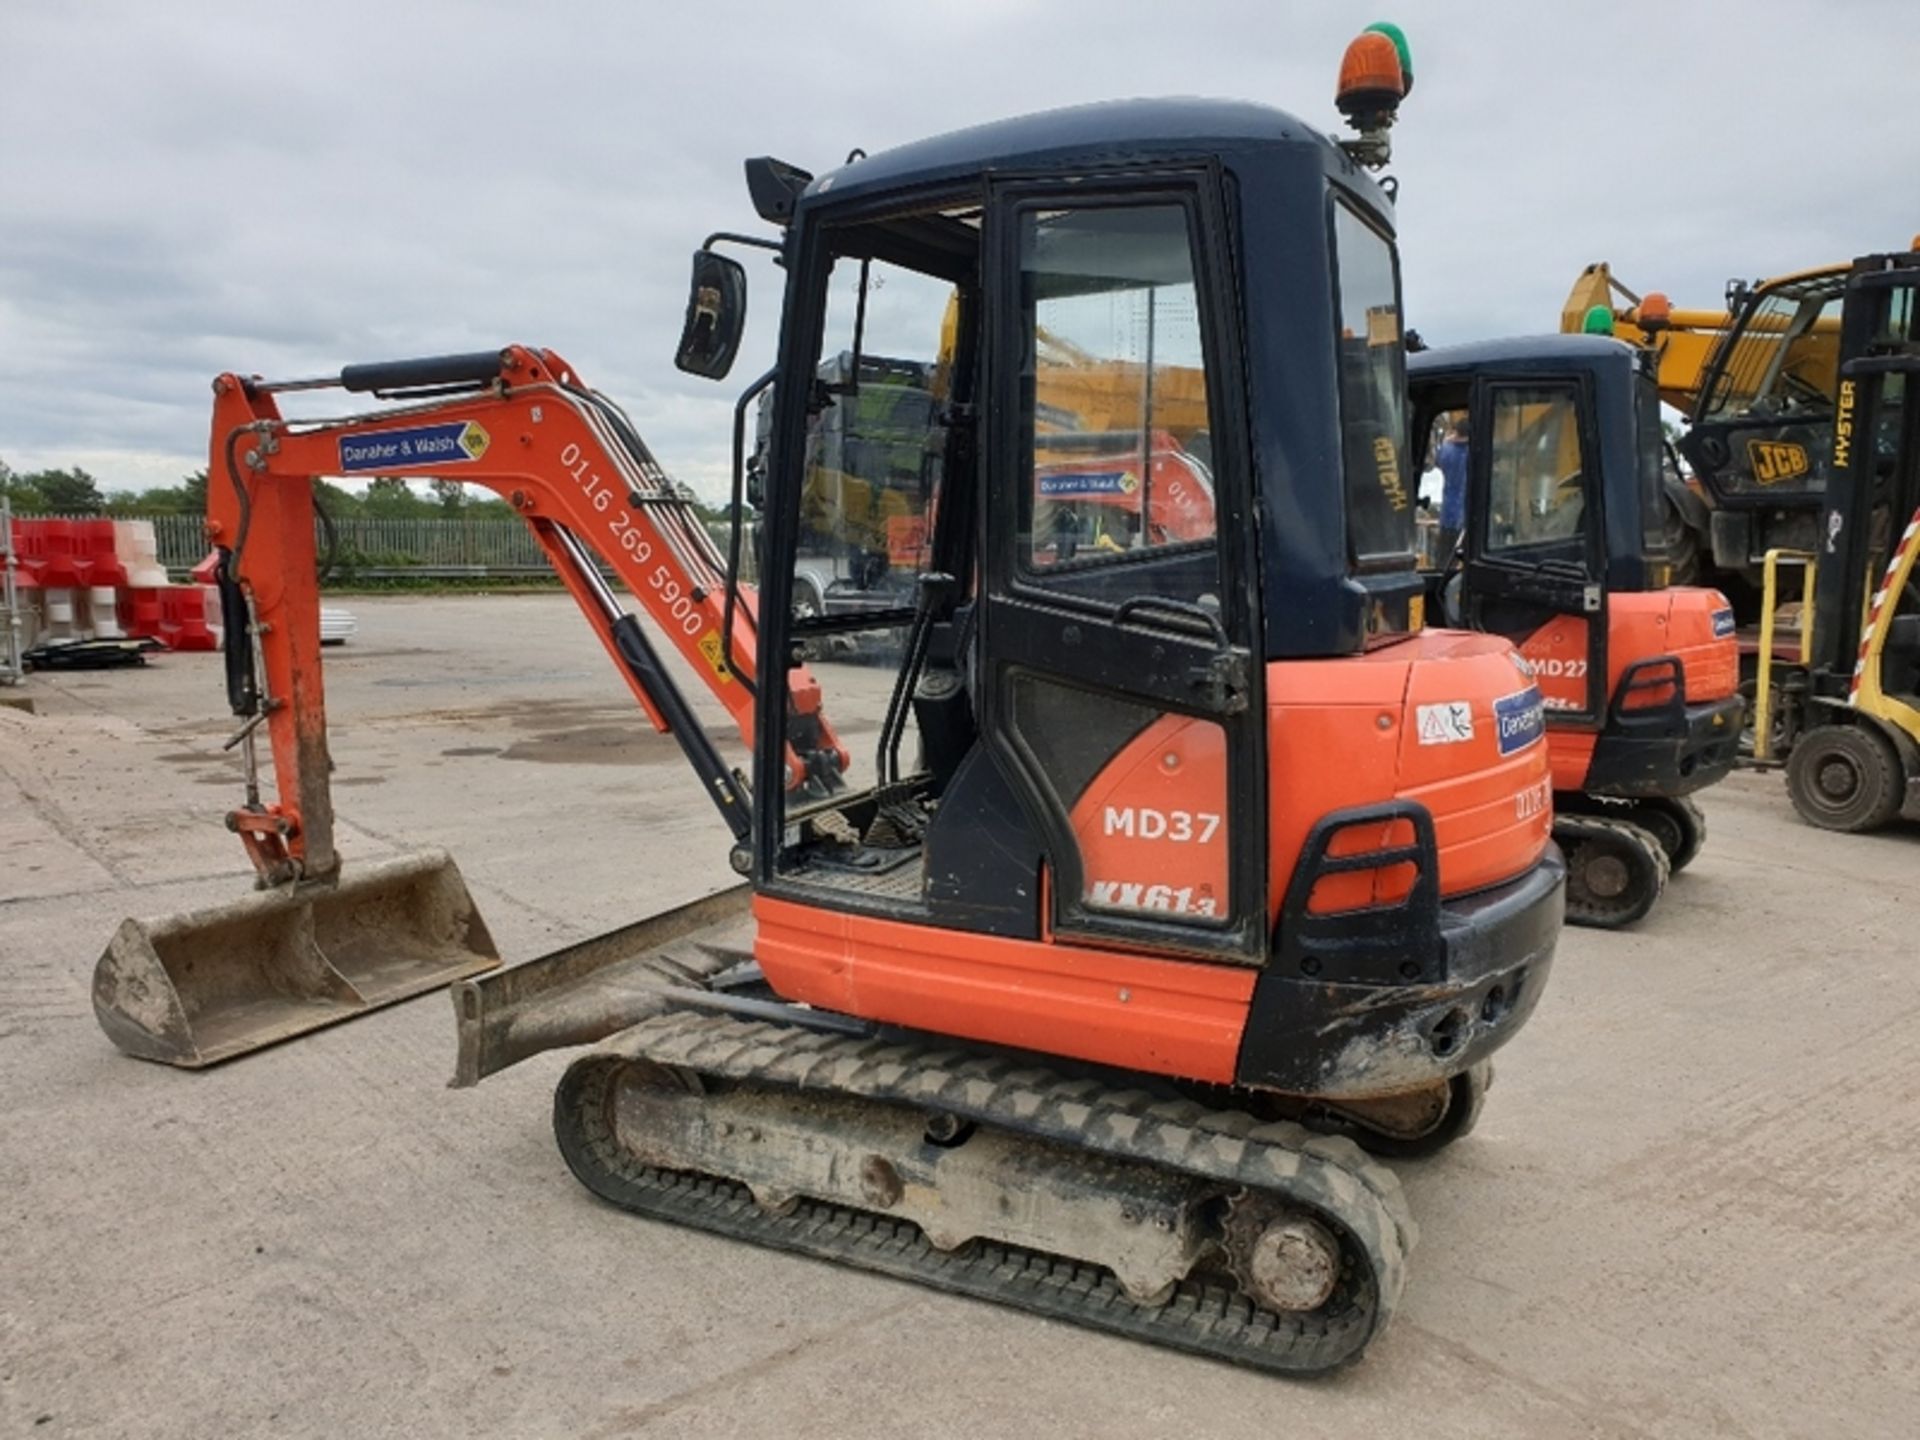 2015 KUBOTA KX61-3 MINI DIGGER, PIPED, BLADE, OFFSET BOOM, RUBBER TRACKS, RED KEY, 3 BUCKETS, SN: - Image 3 of 9